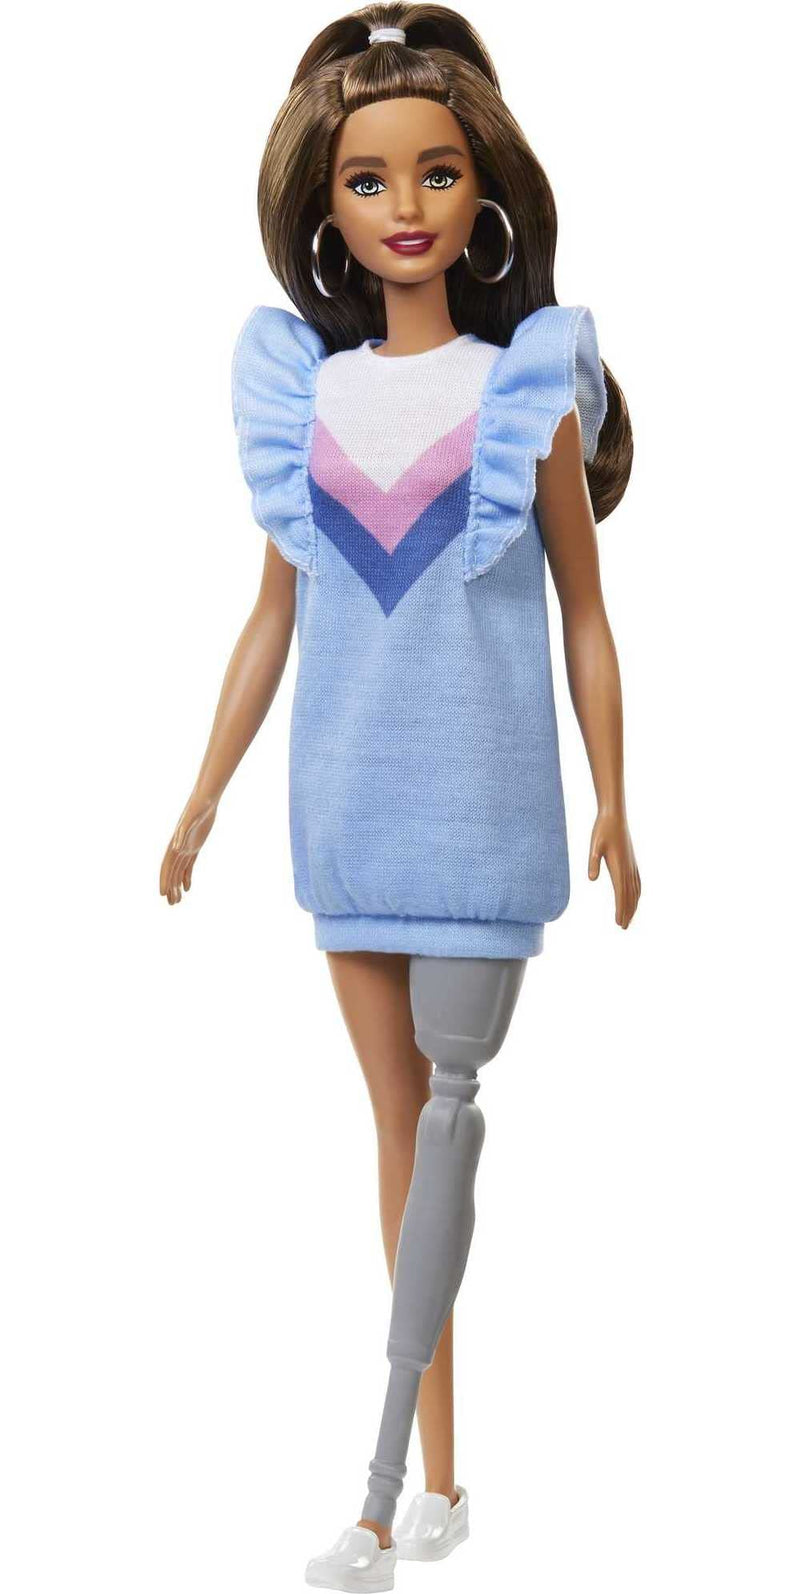 Barbie Fashionistas Doll#121 with Long Brunette Hair and Prosthetic Leg